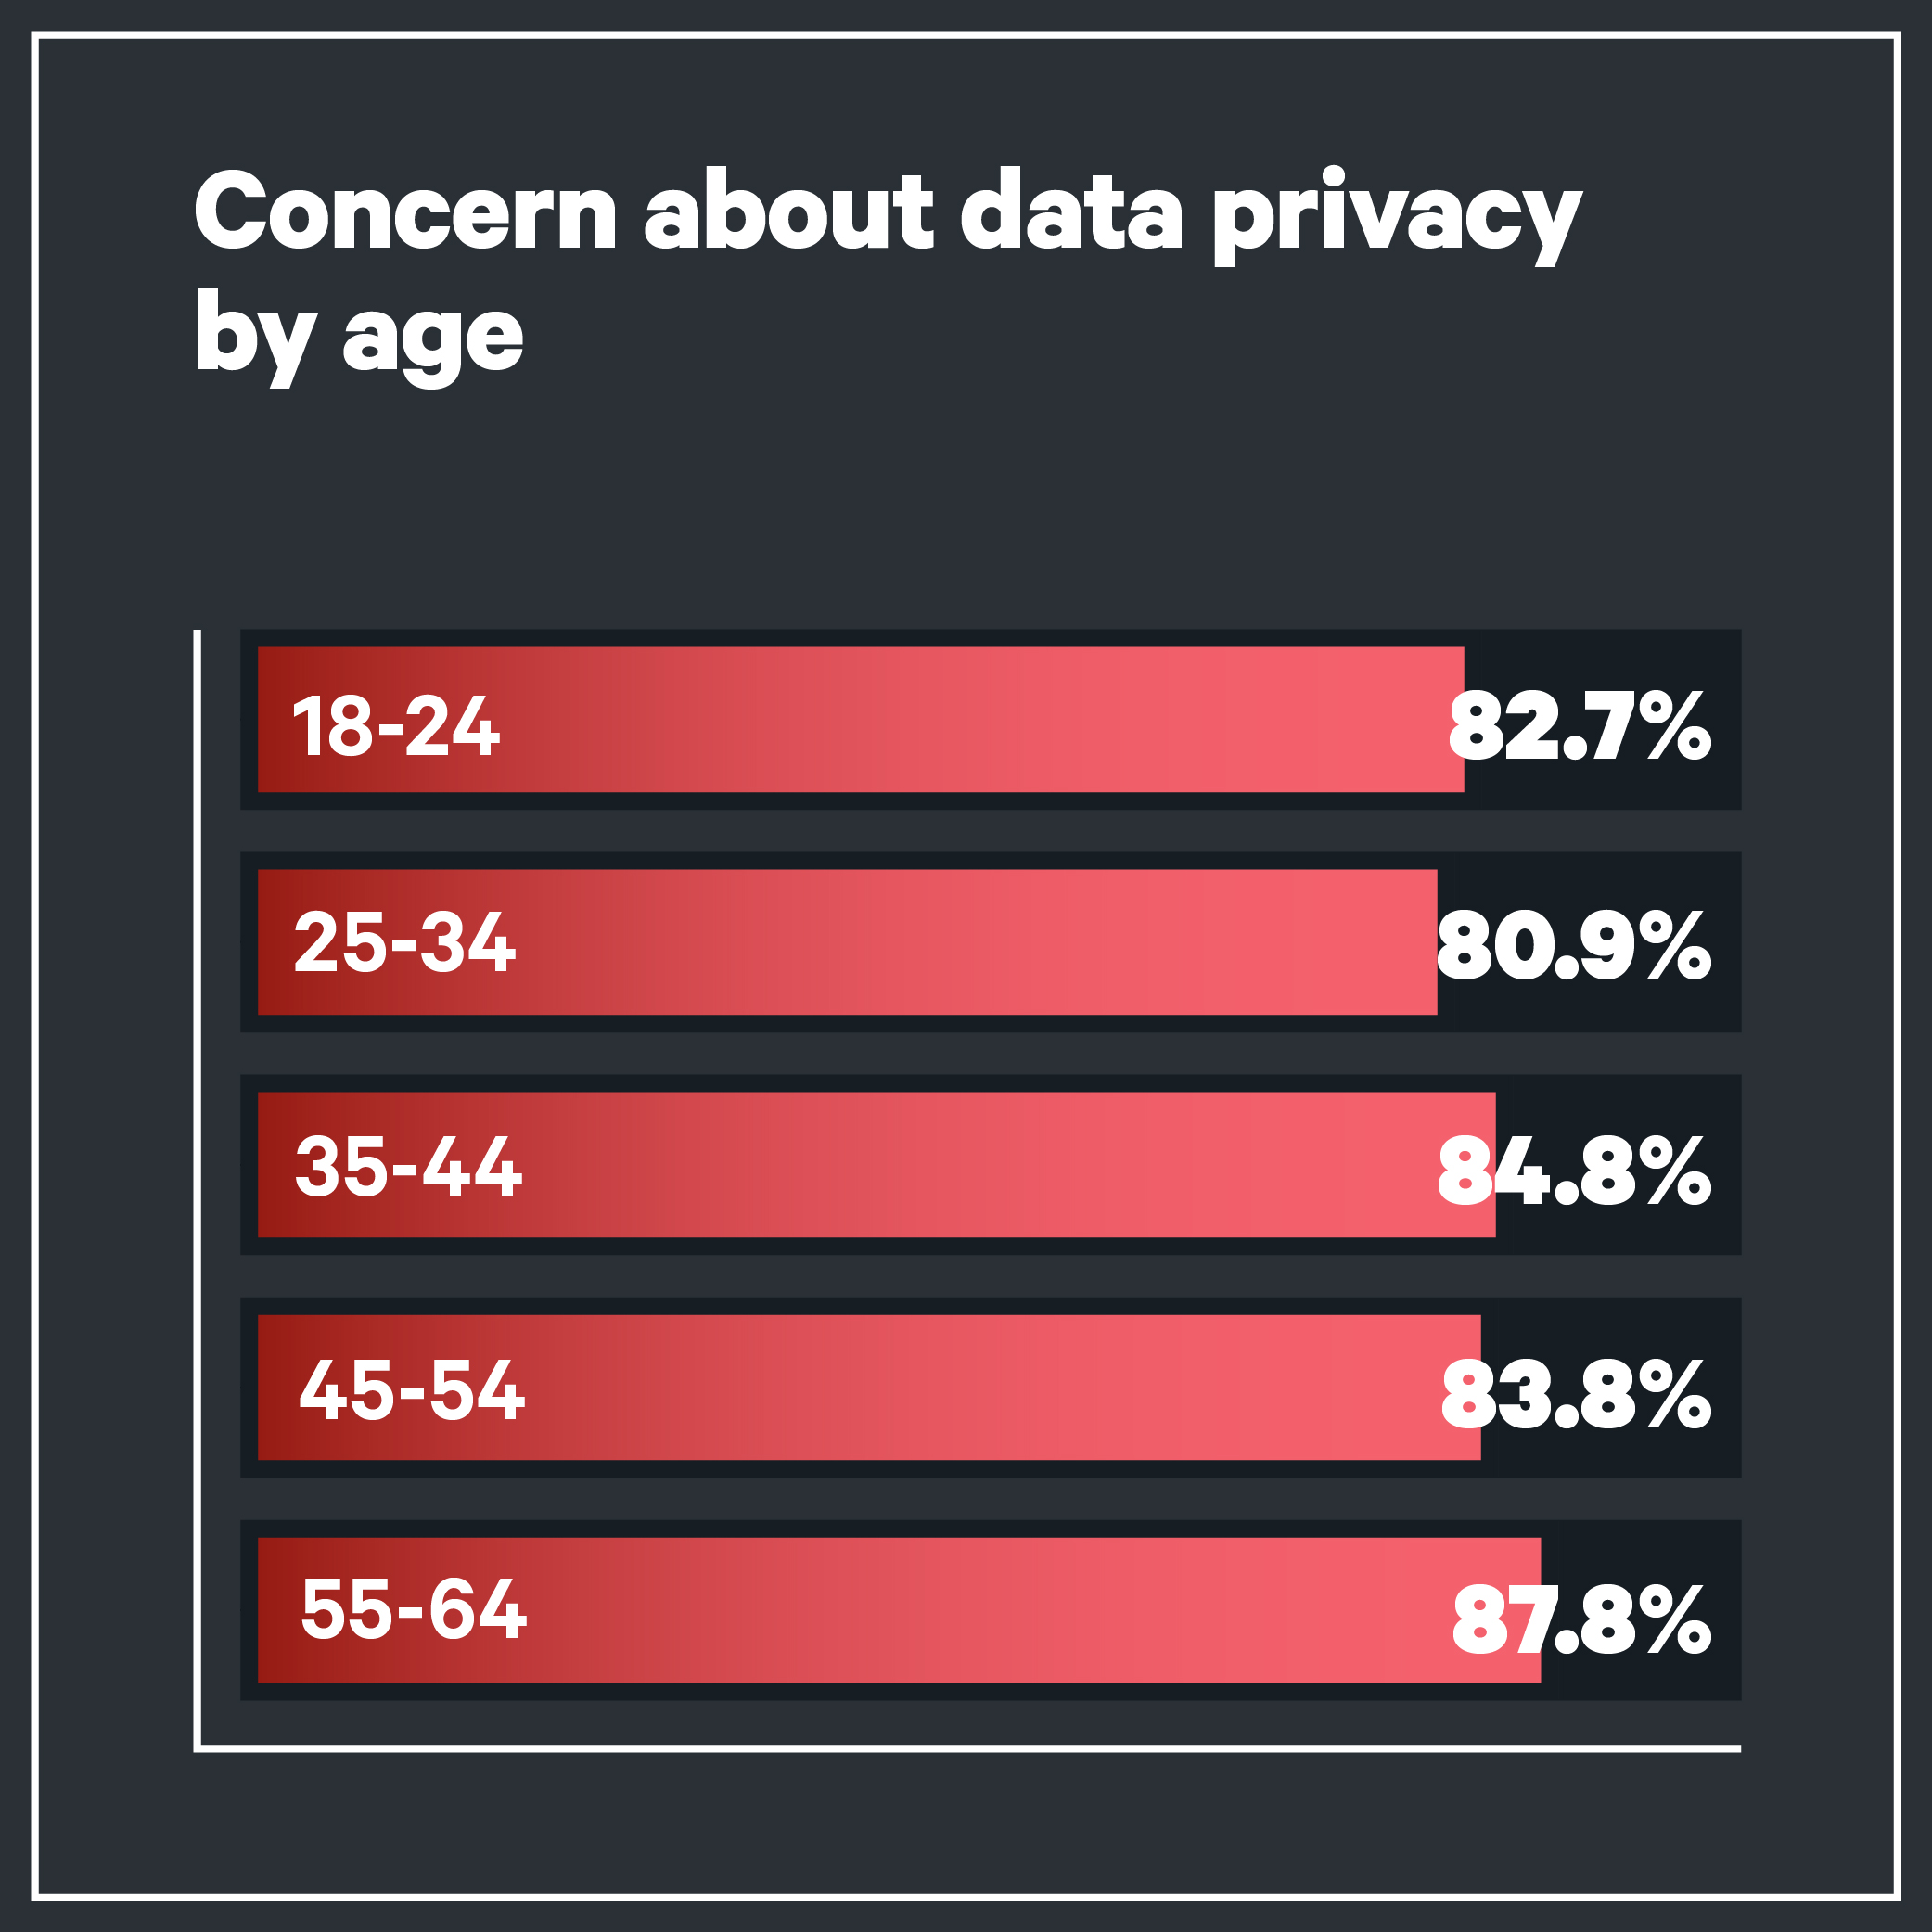 Concern about data privacy by age